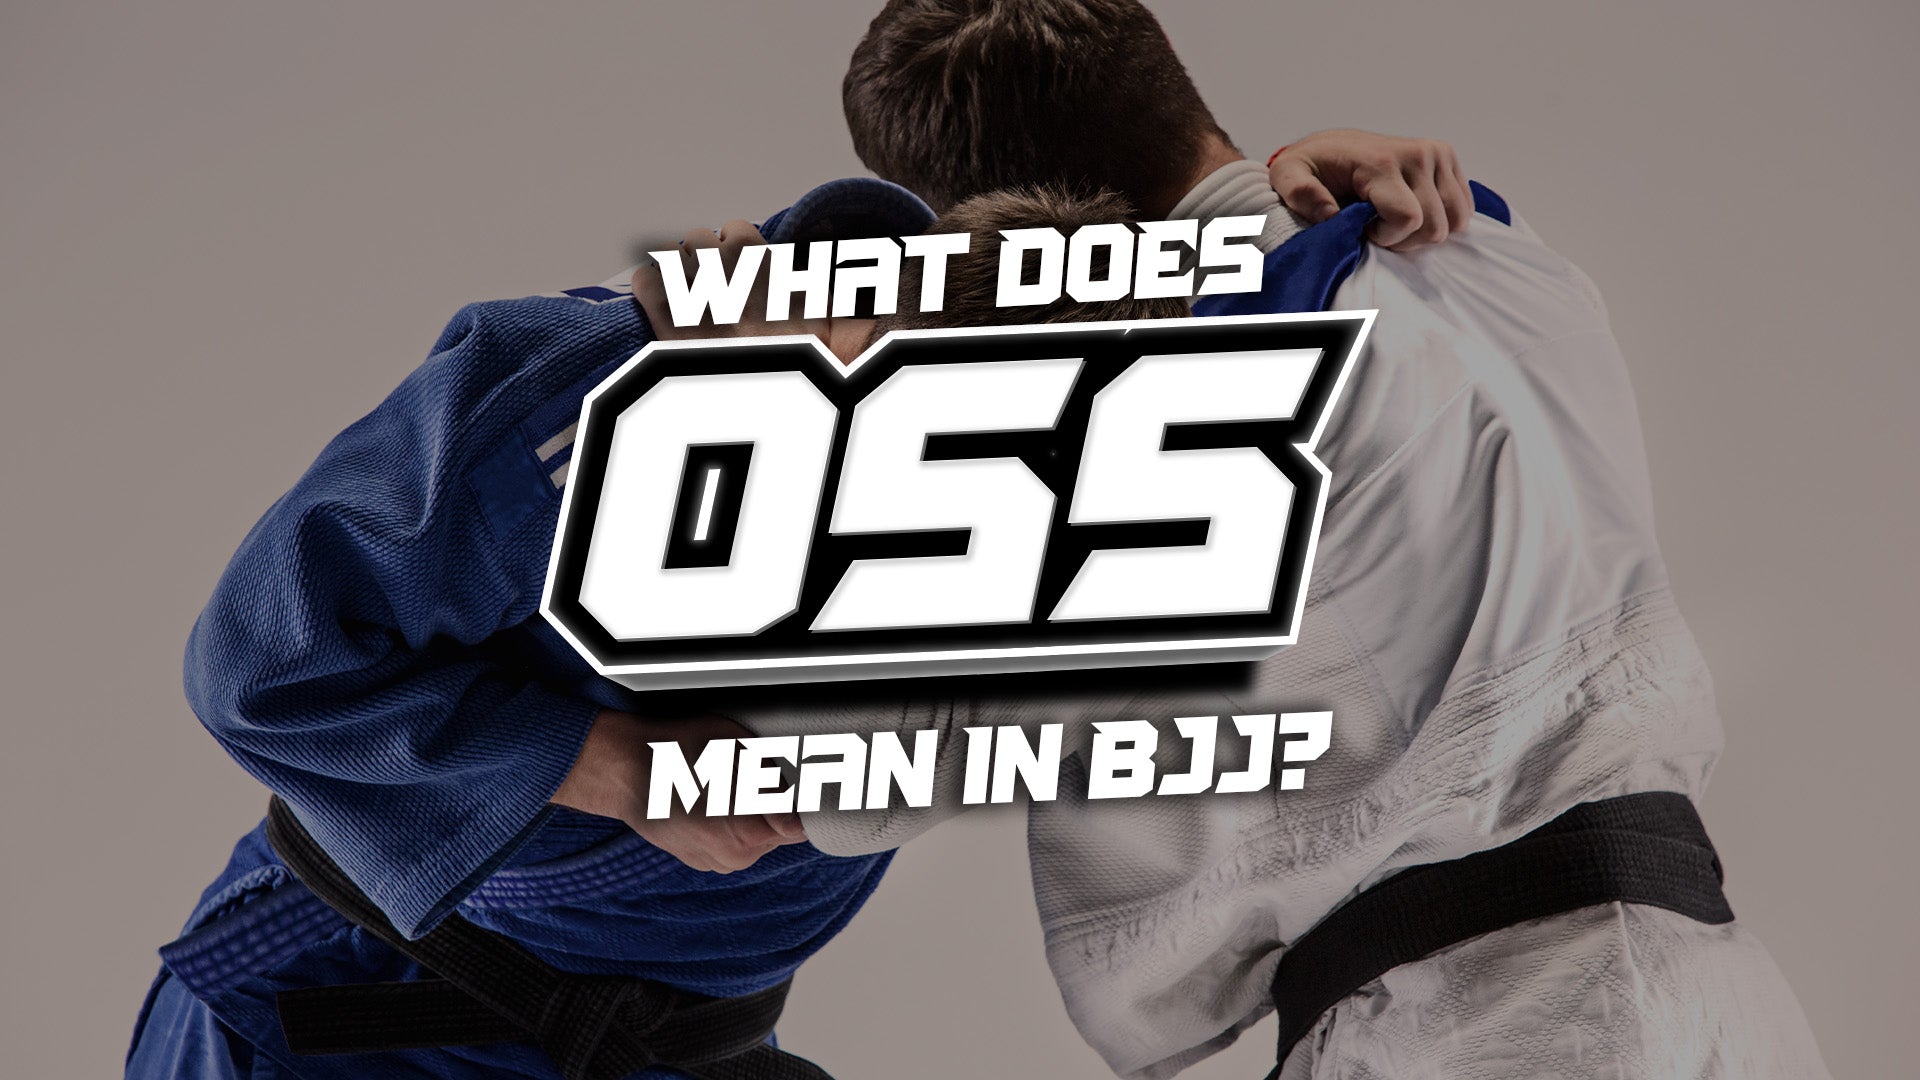 What does OSS mean in BJJ?